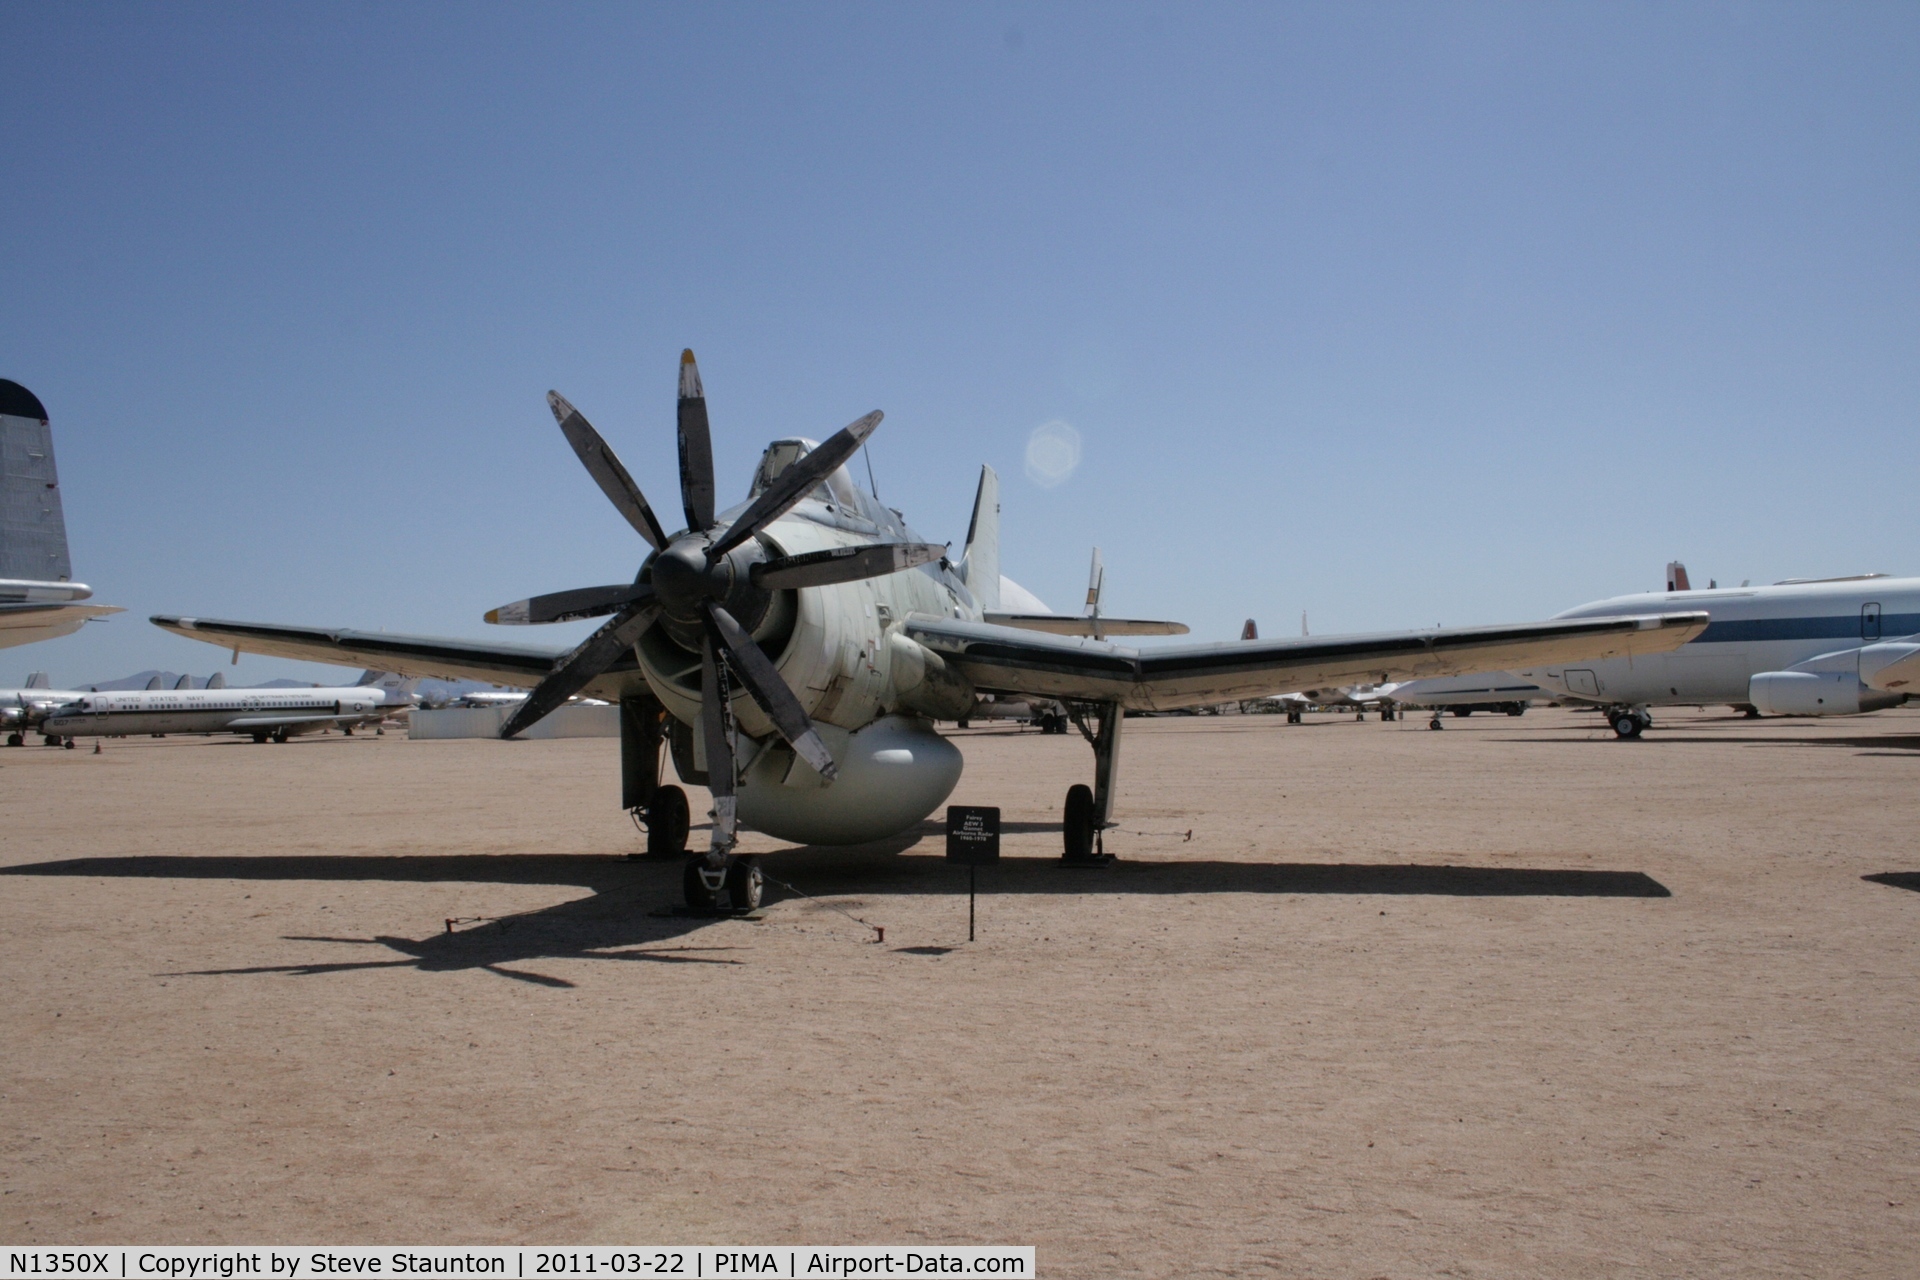 N1350X, 1960 Fairey Gannet AEW.3 C/N F9451, Taken at Pima Air and Space Museum, in March 2011 whilst on an Aeroprint Aviation tour